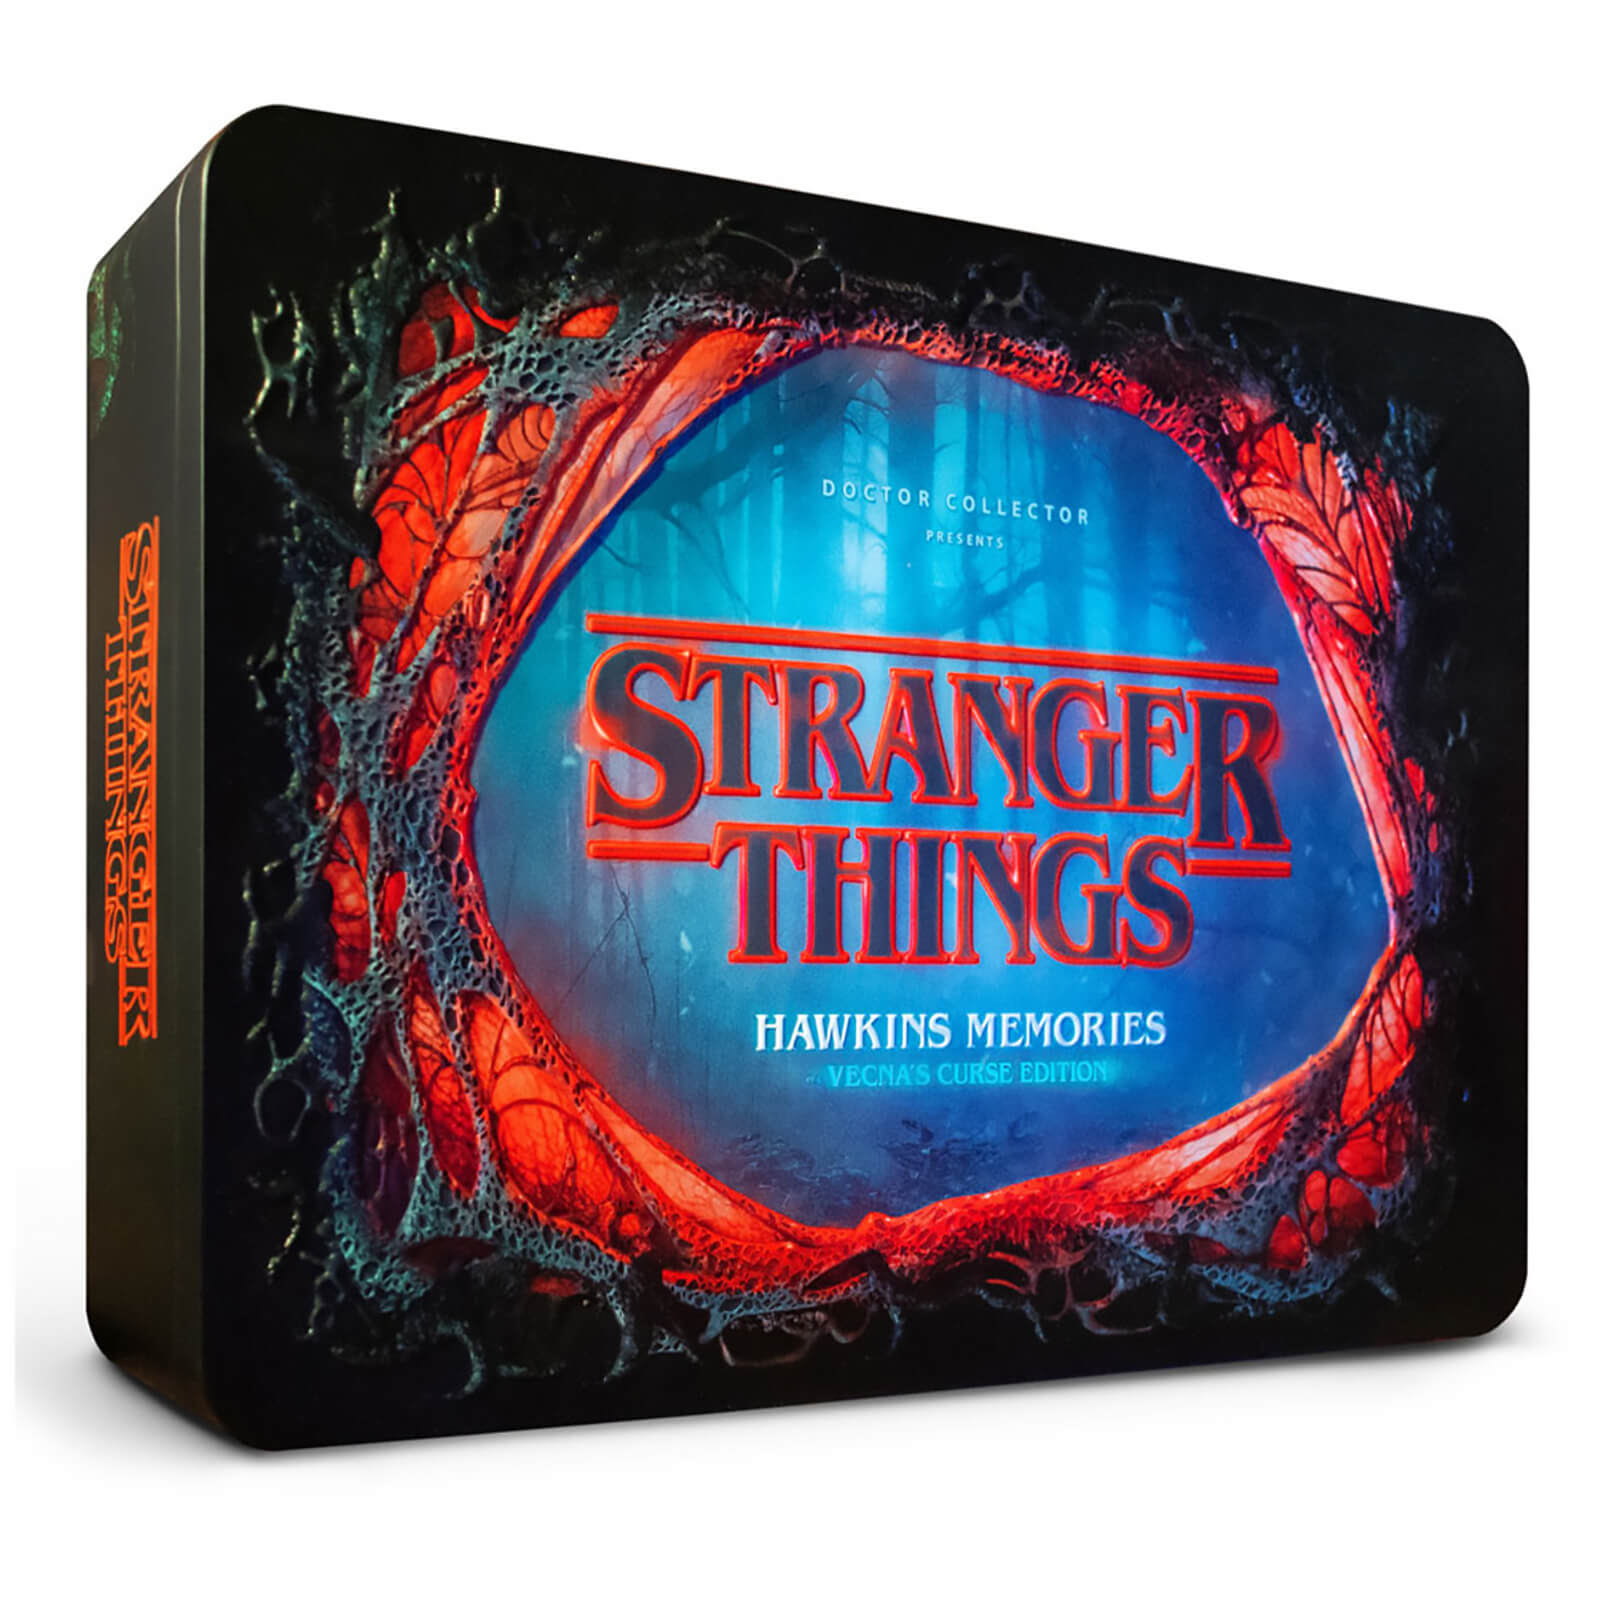 Image of Doctor Collector Stranger Things Hawkins Memories - Vecna’s Curse Edition